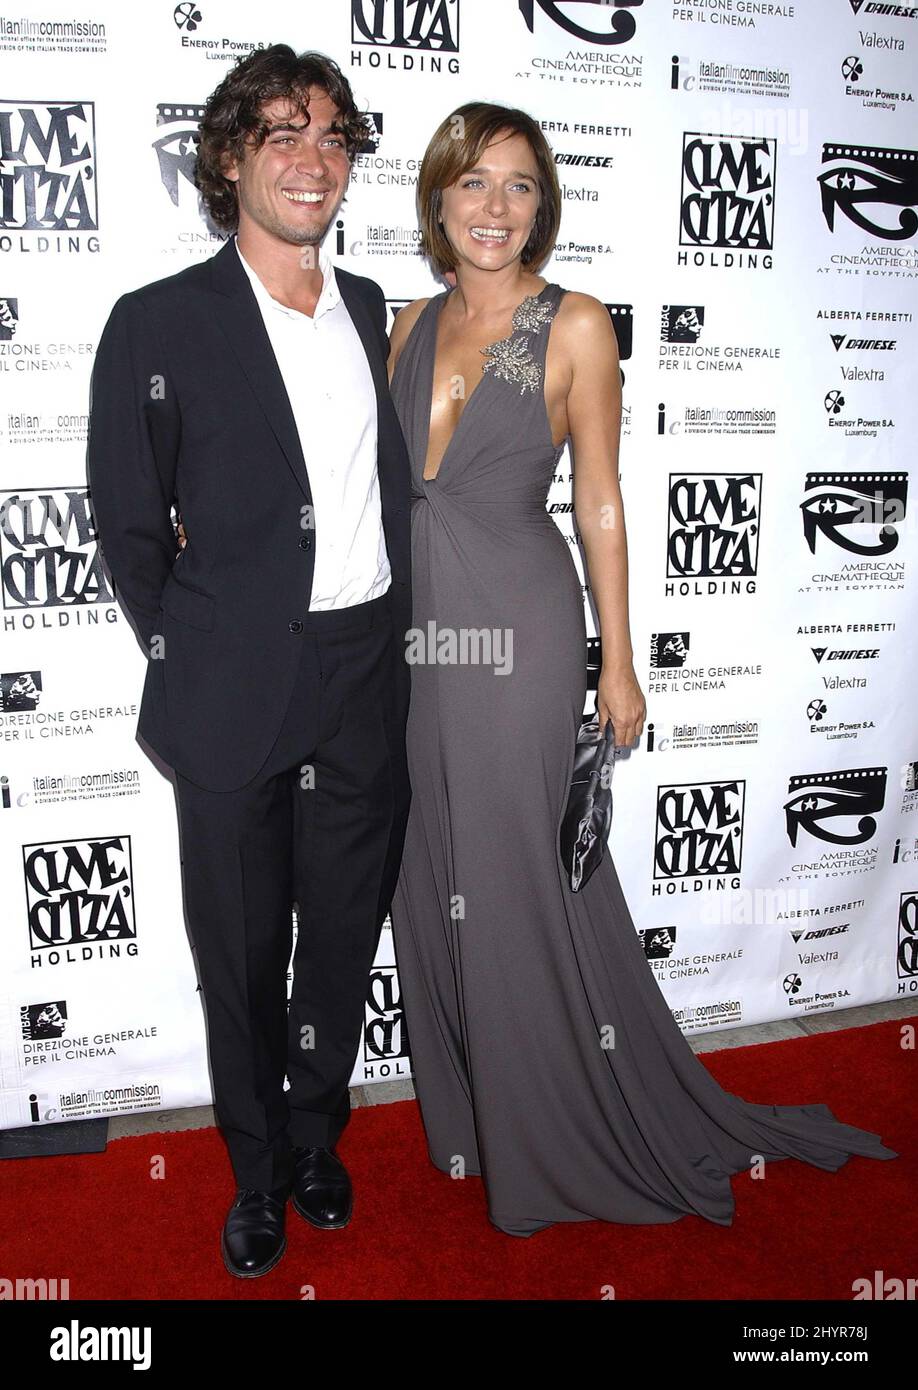 Riccardo Scamarcio and Valeria Golino attend The 4th Annual Cinema Italian Style Festival held at the Egyptian Theatre in Hollywood. Stock Photo